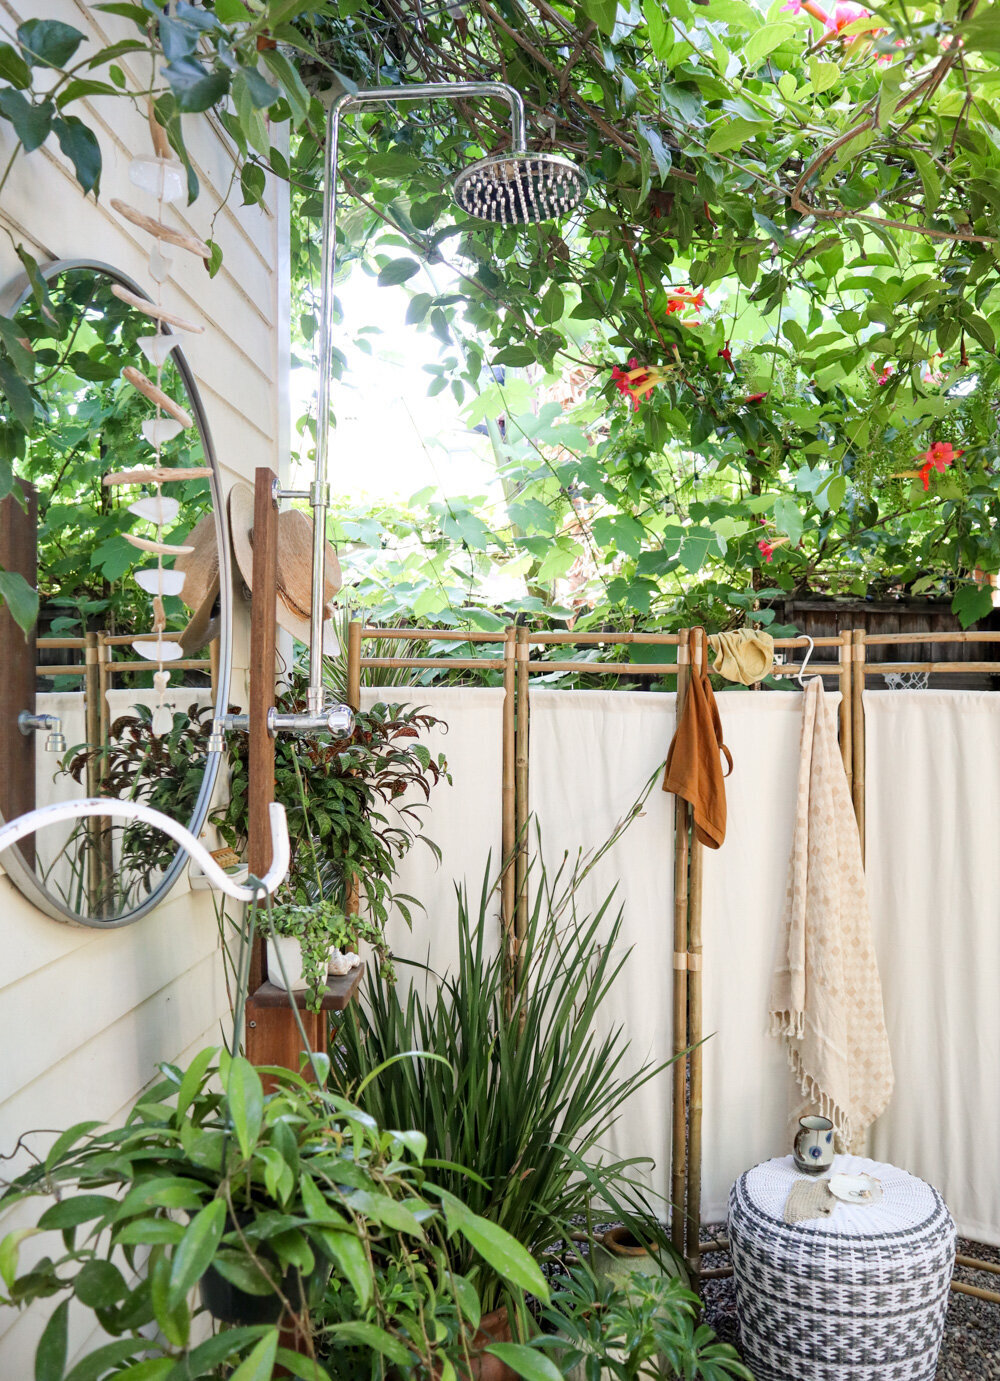 small-space-outdoor-shower-ebay-new-vintage-decor-14.jpg